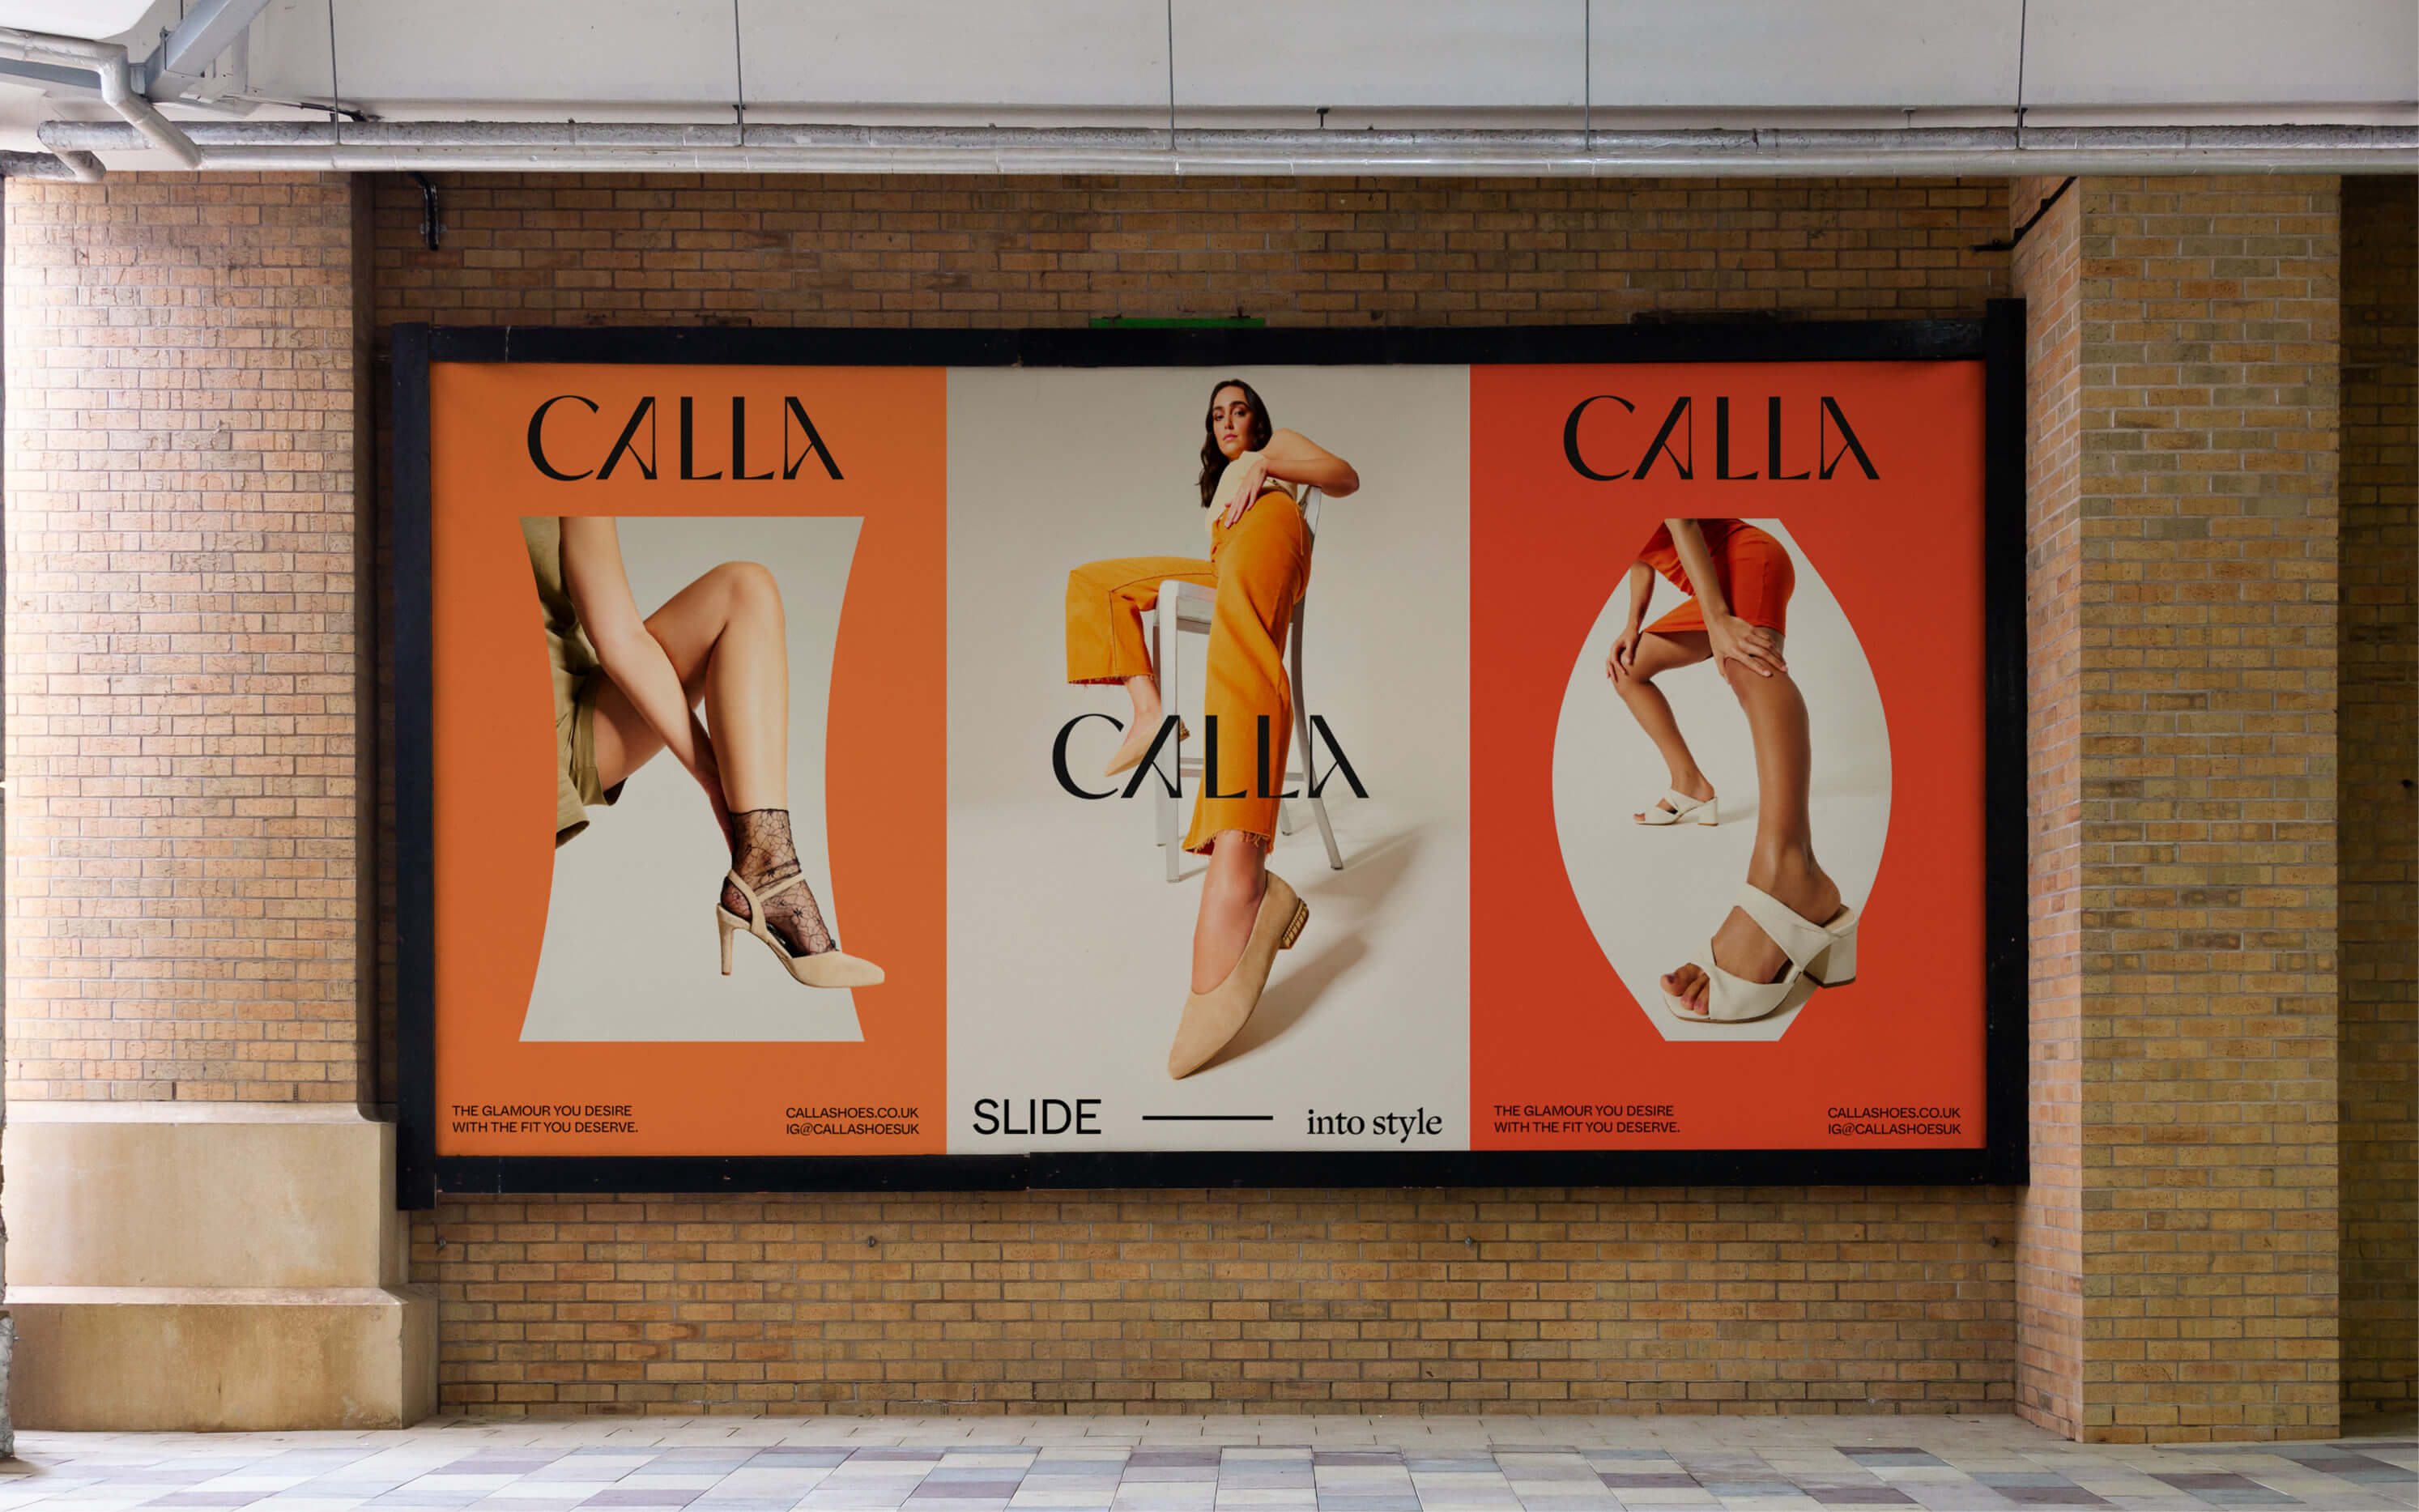 Empowering Brand Redesign: Calla’s High-End Shoe Design with Purpose